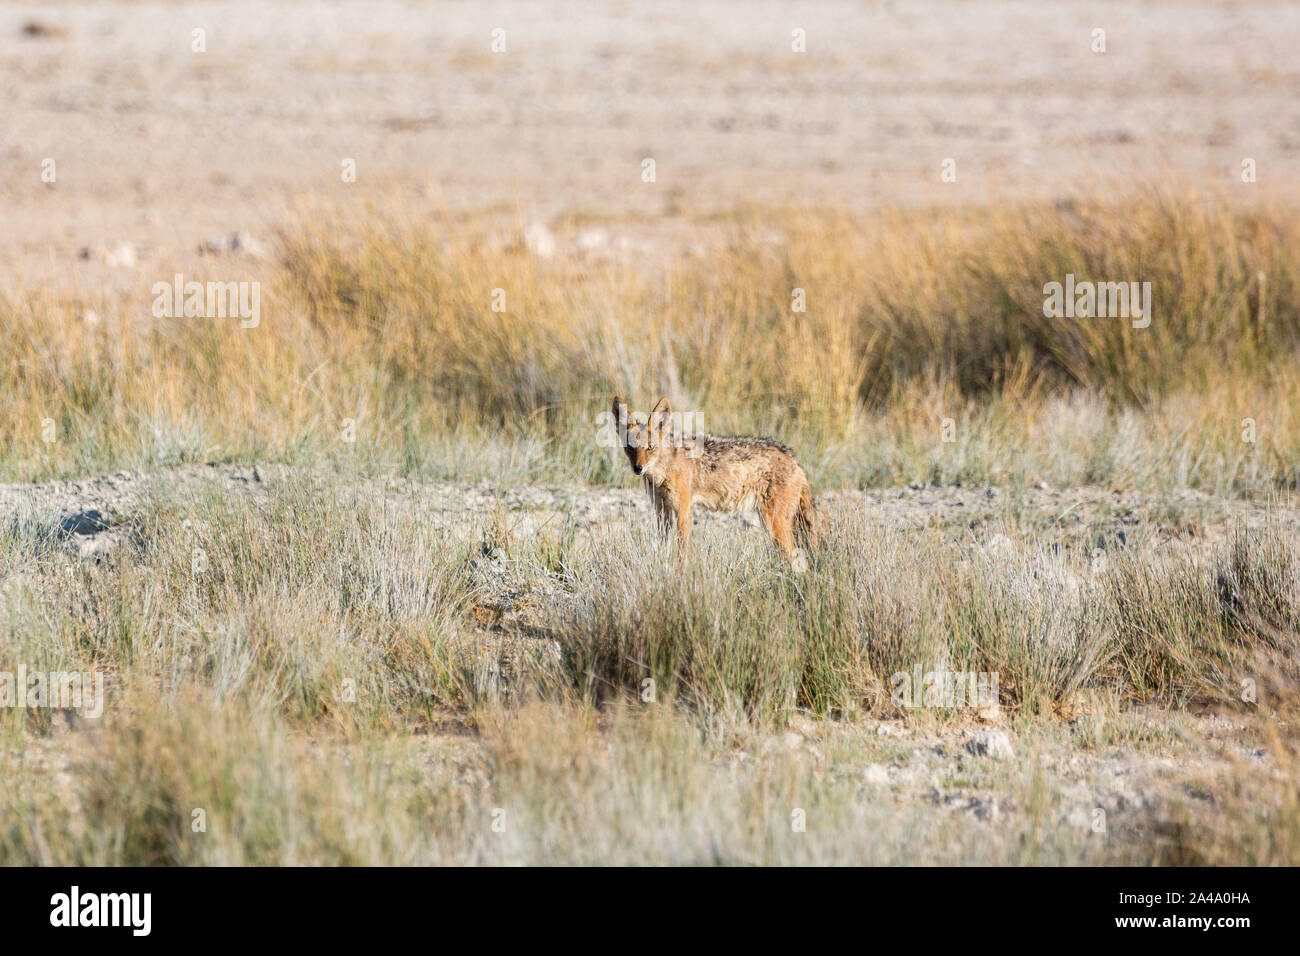 A jackal in the middle of high grass, Etosha, Namibia, Africa Stock Photo